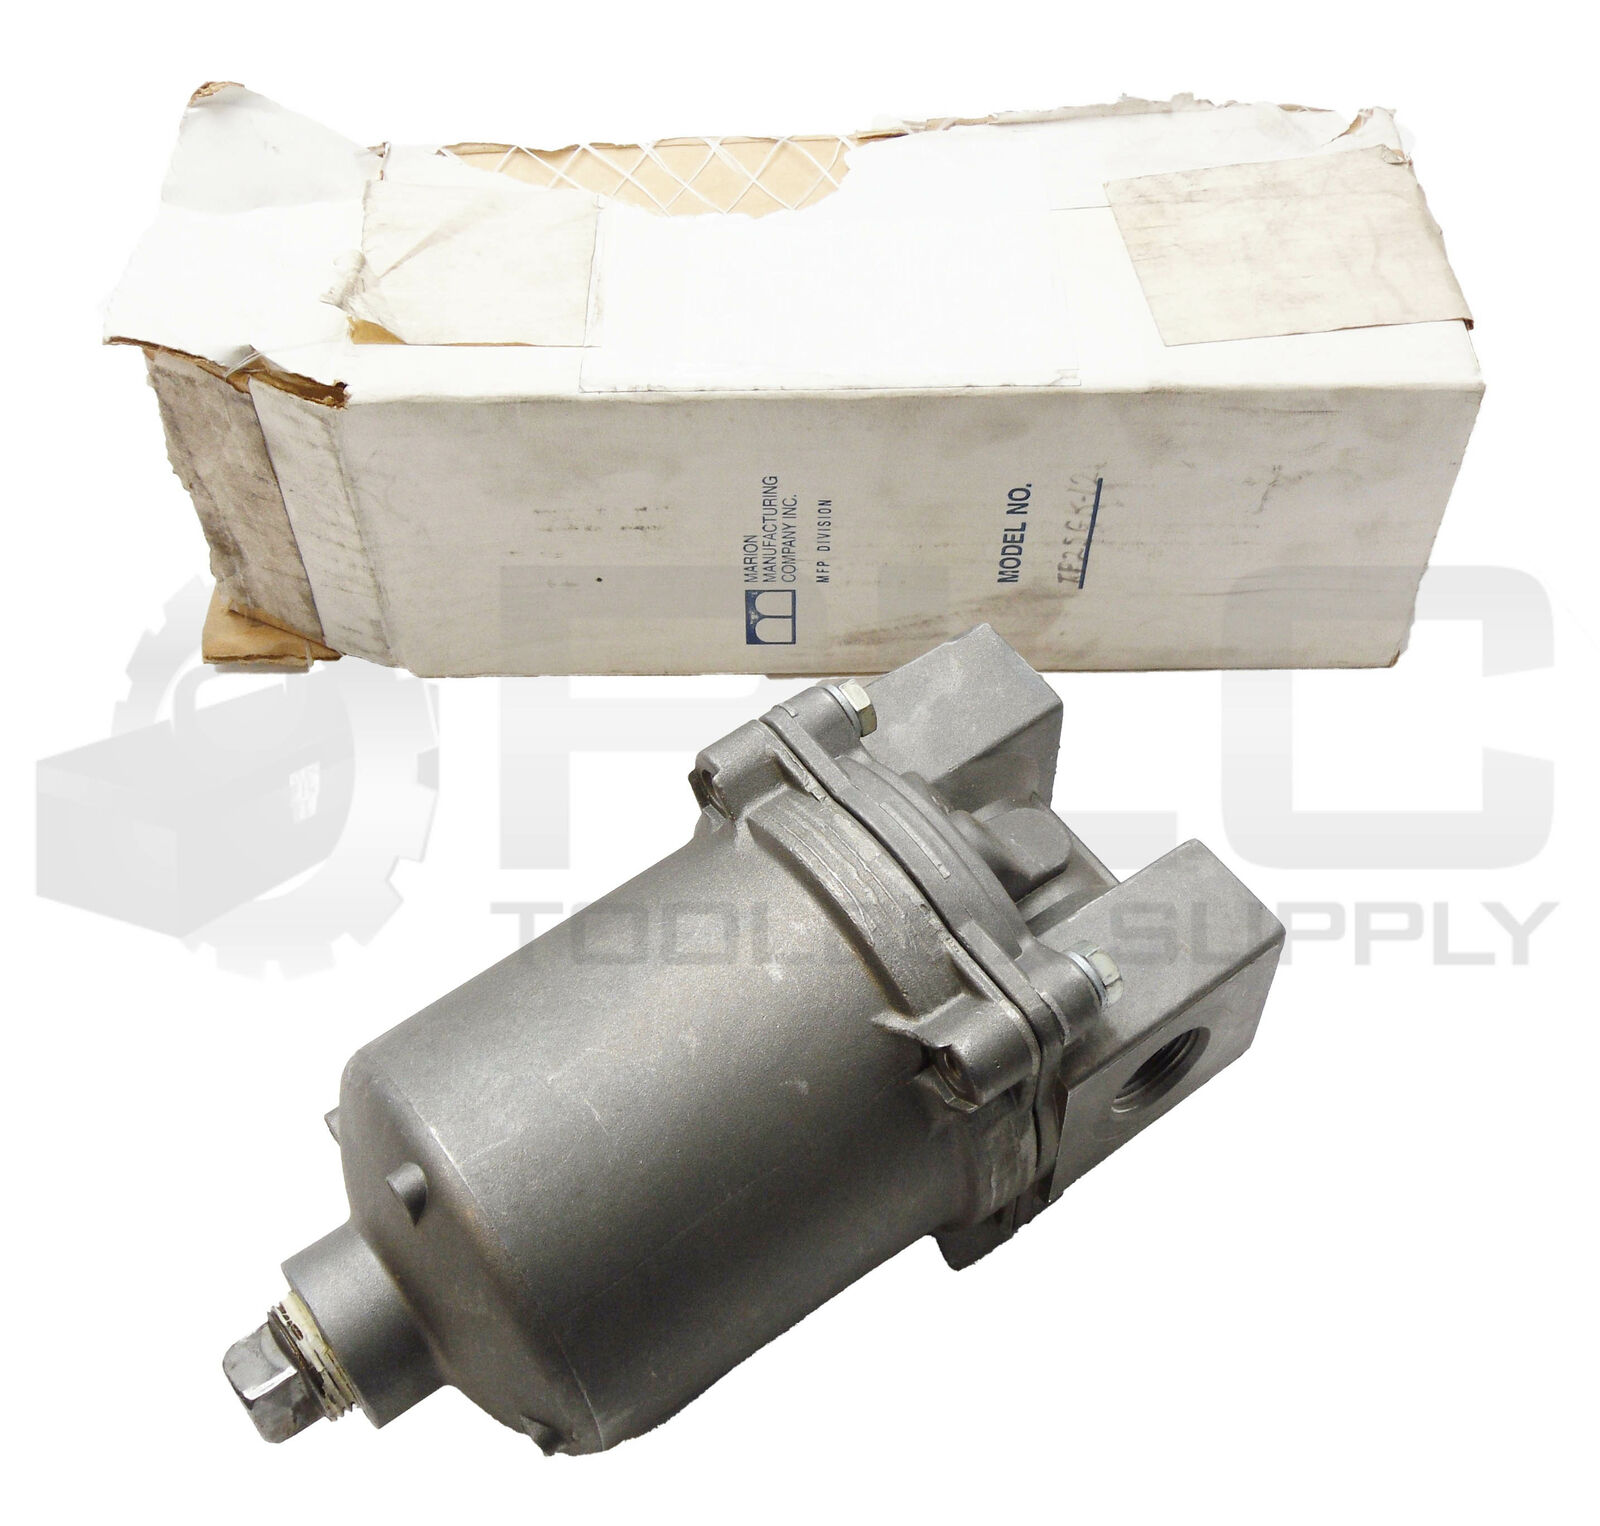 NEW MARION MANUFACTURING TF25GK-12 LOW PRESSURE FILTER